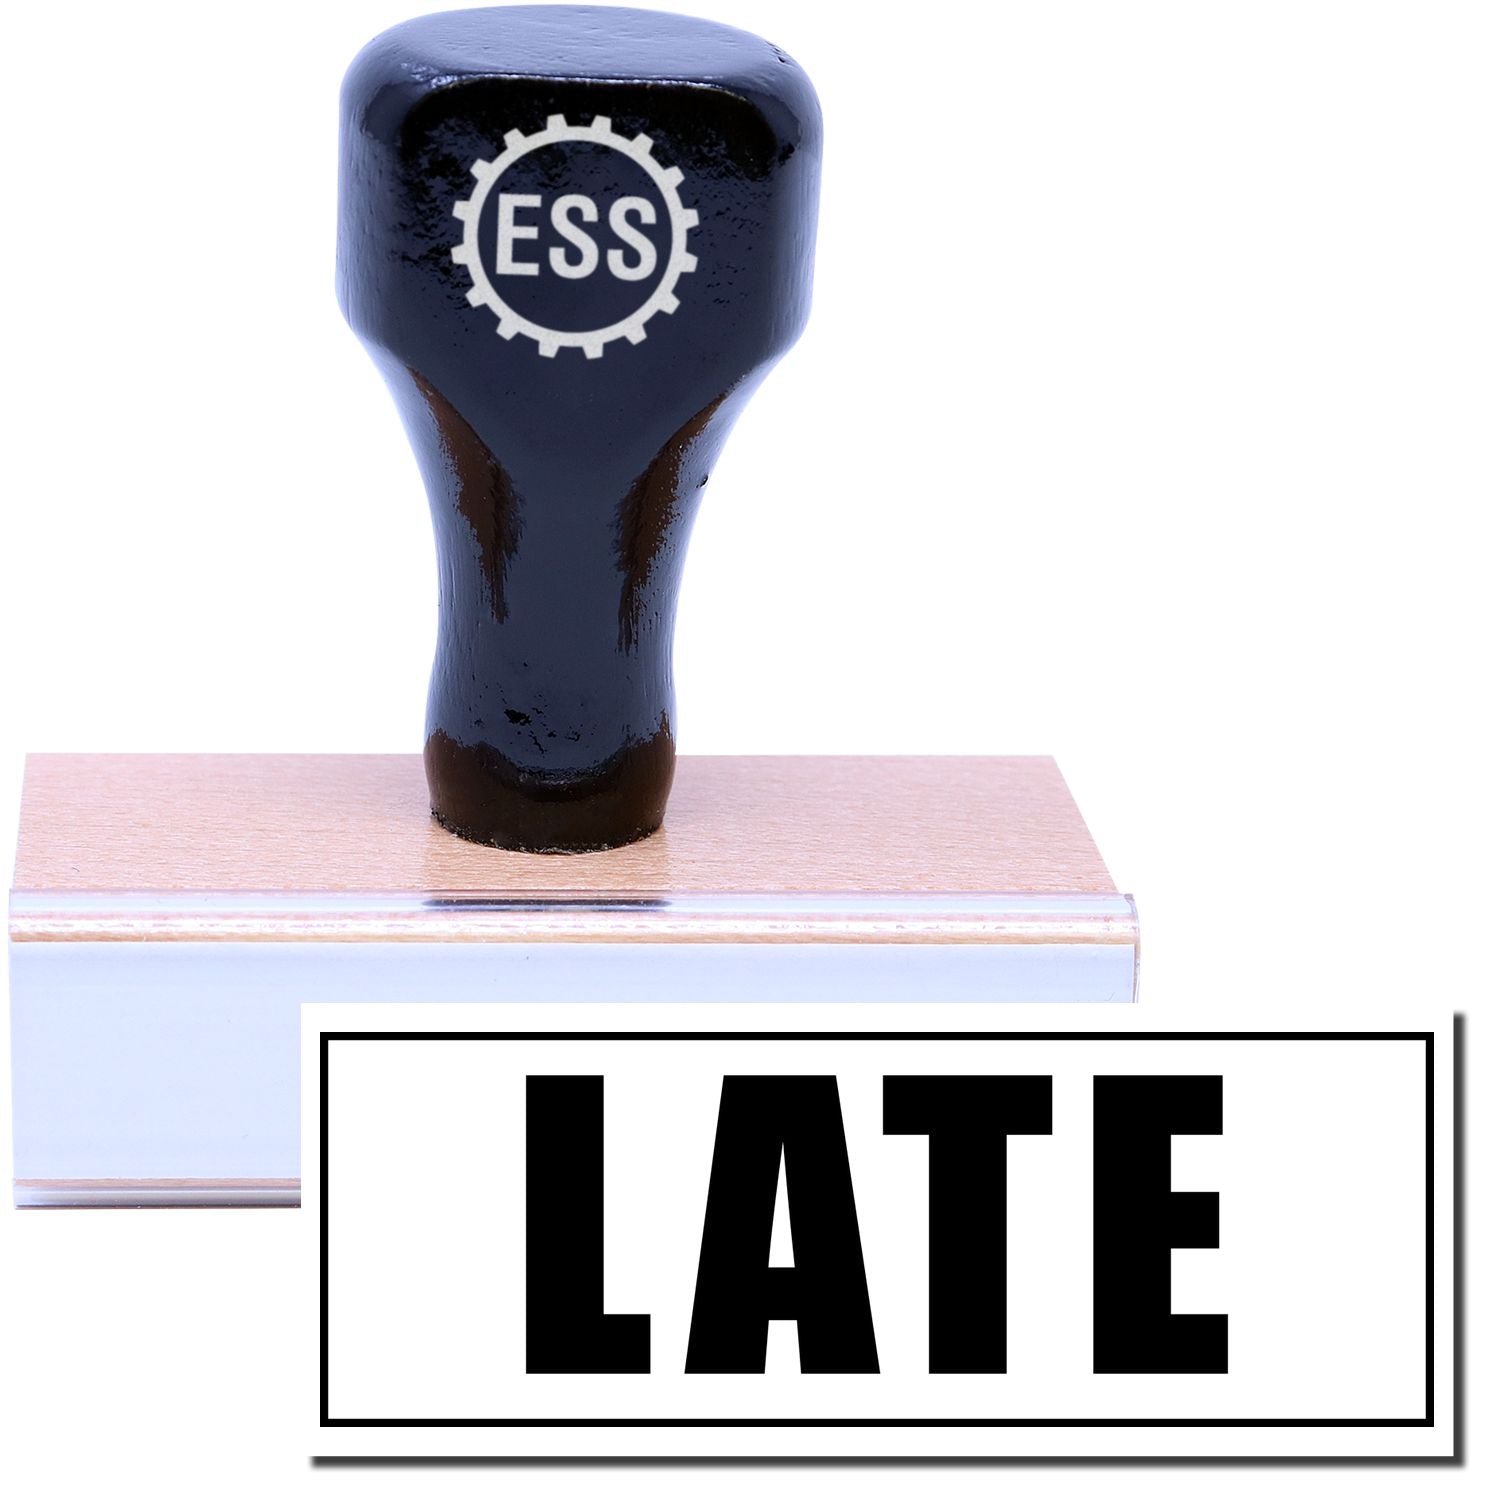 A stock office rubber stamp with a stamped image showing how the text "LATE" in bold font with a border is displayed after stamping.